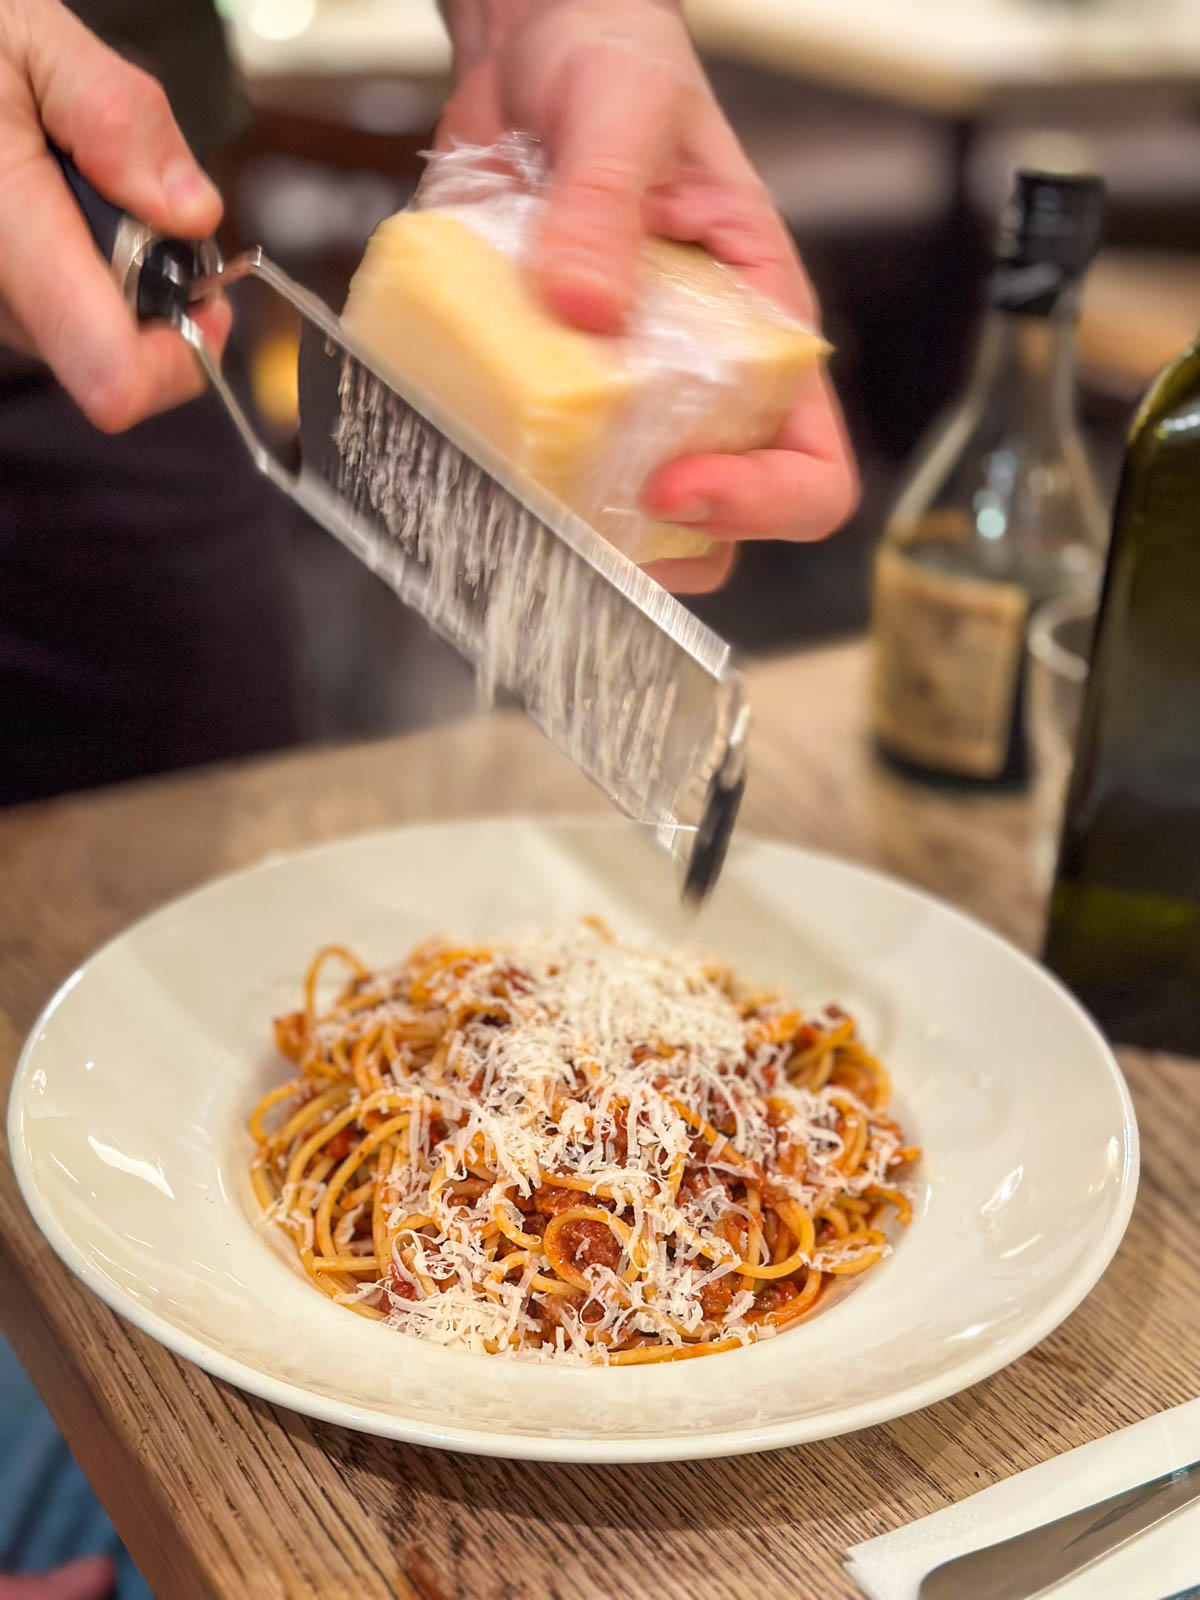 A hand is grating parmesan over a bowl of spaghetti.